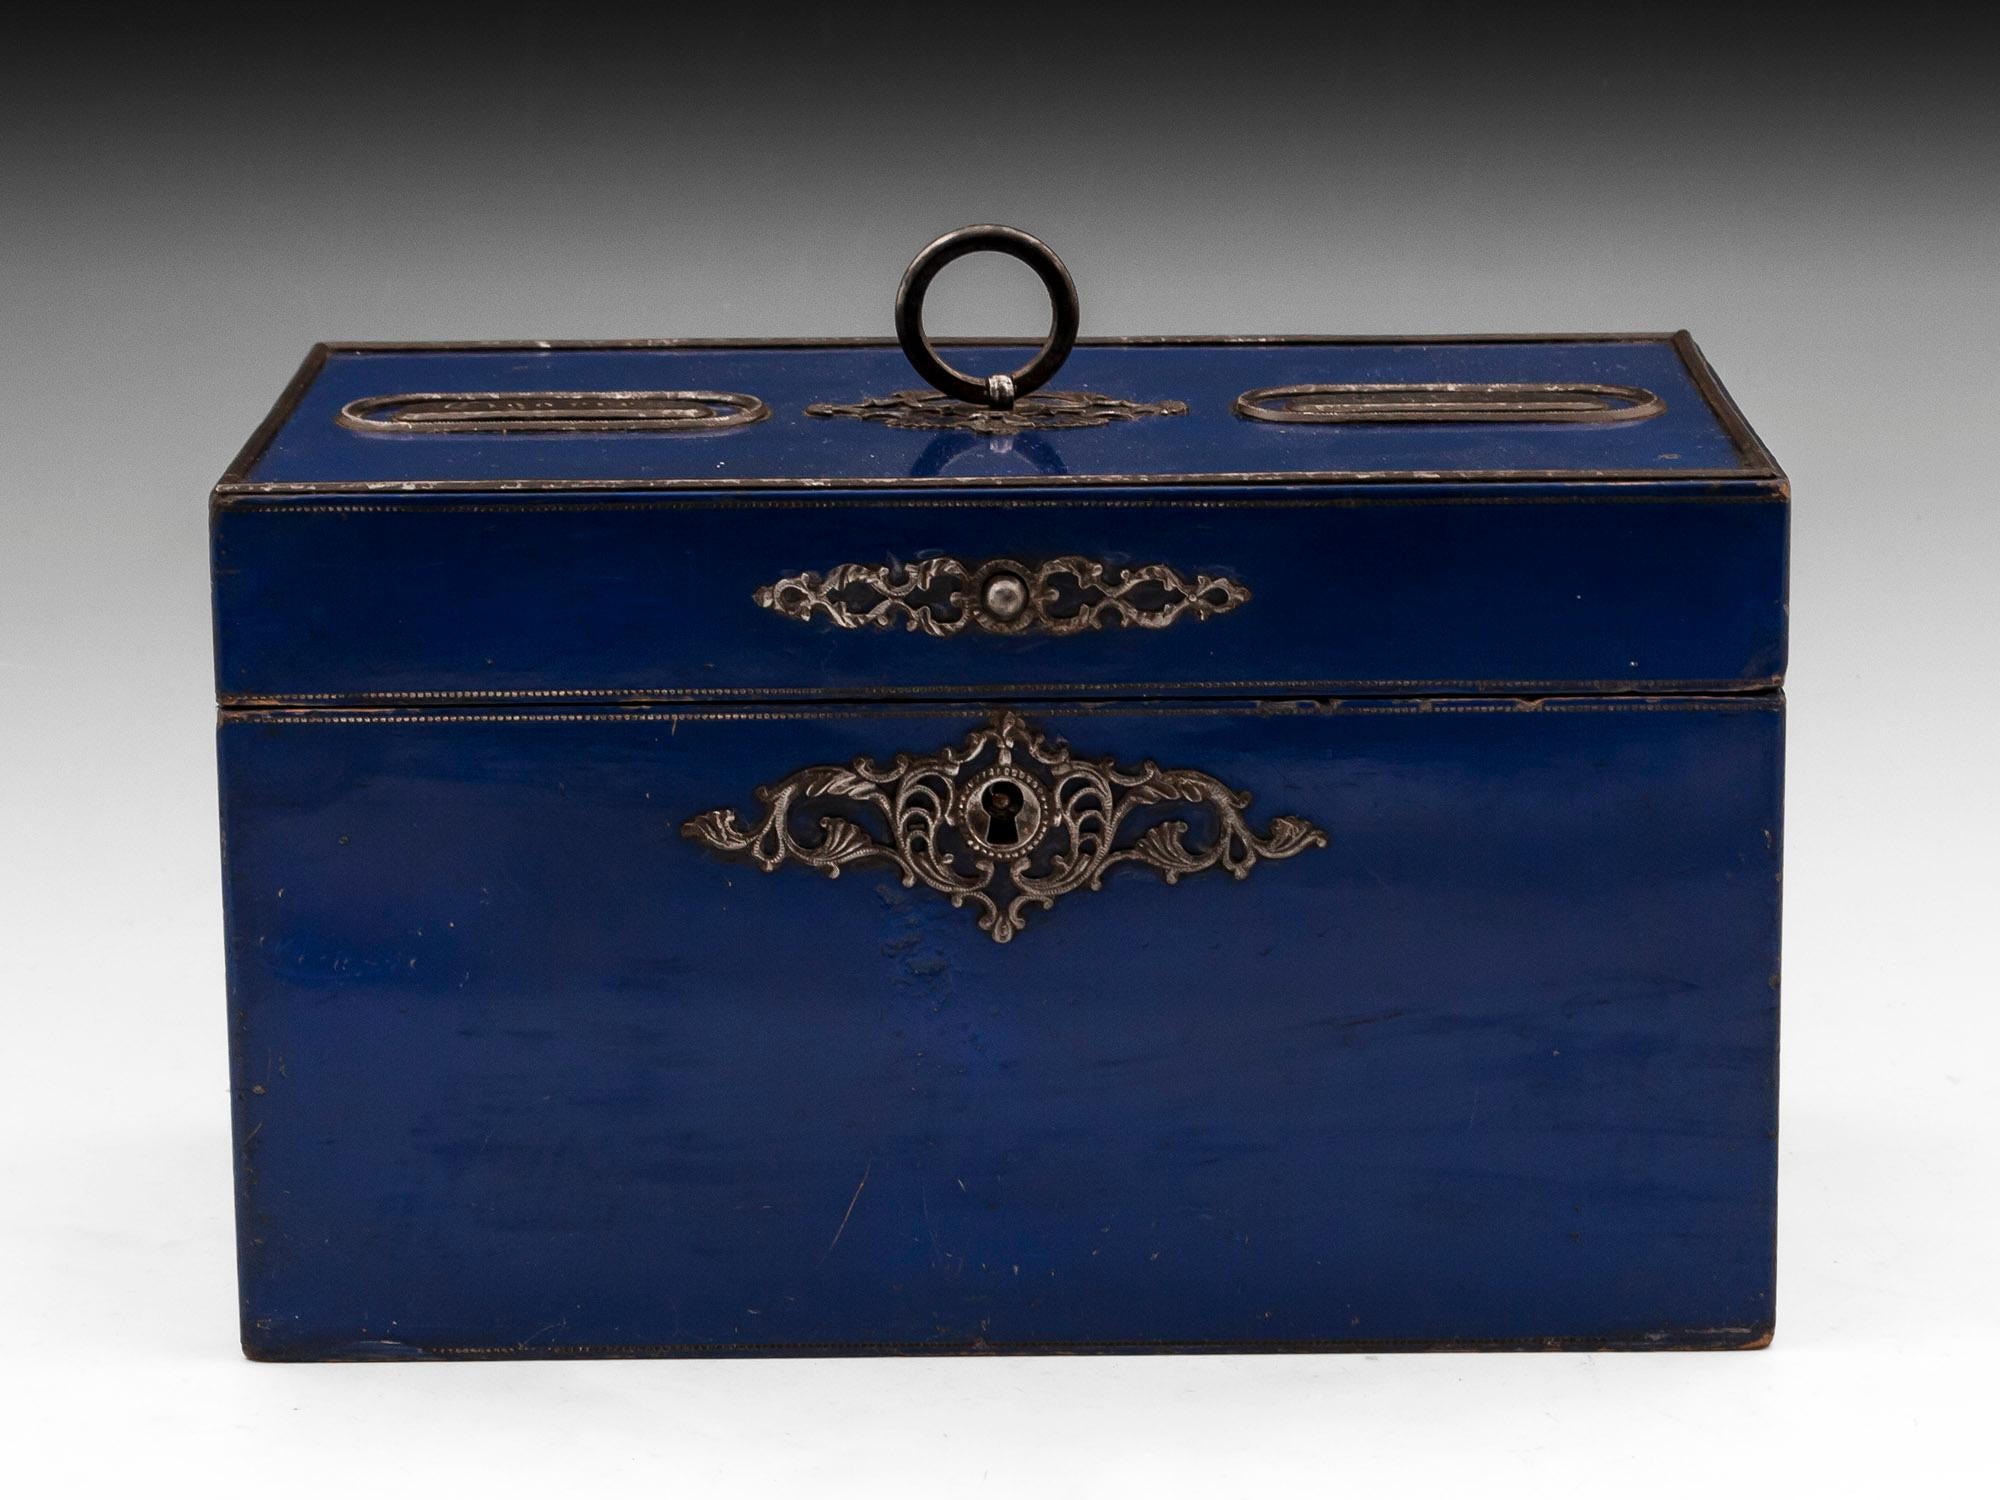 Vibrant blue Smokers Cigar & Tobacco box adorned with ornate cut steel escutcheon and a handles. The top has two steel plaques which read: 